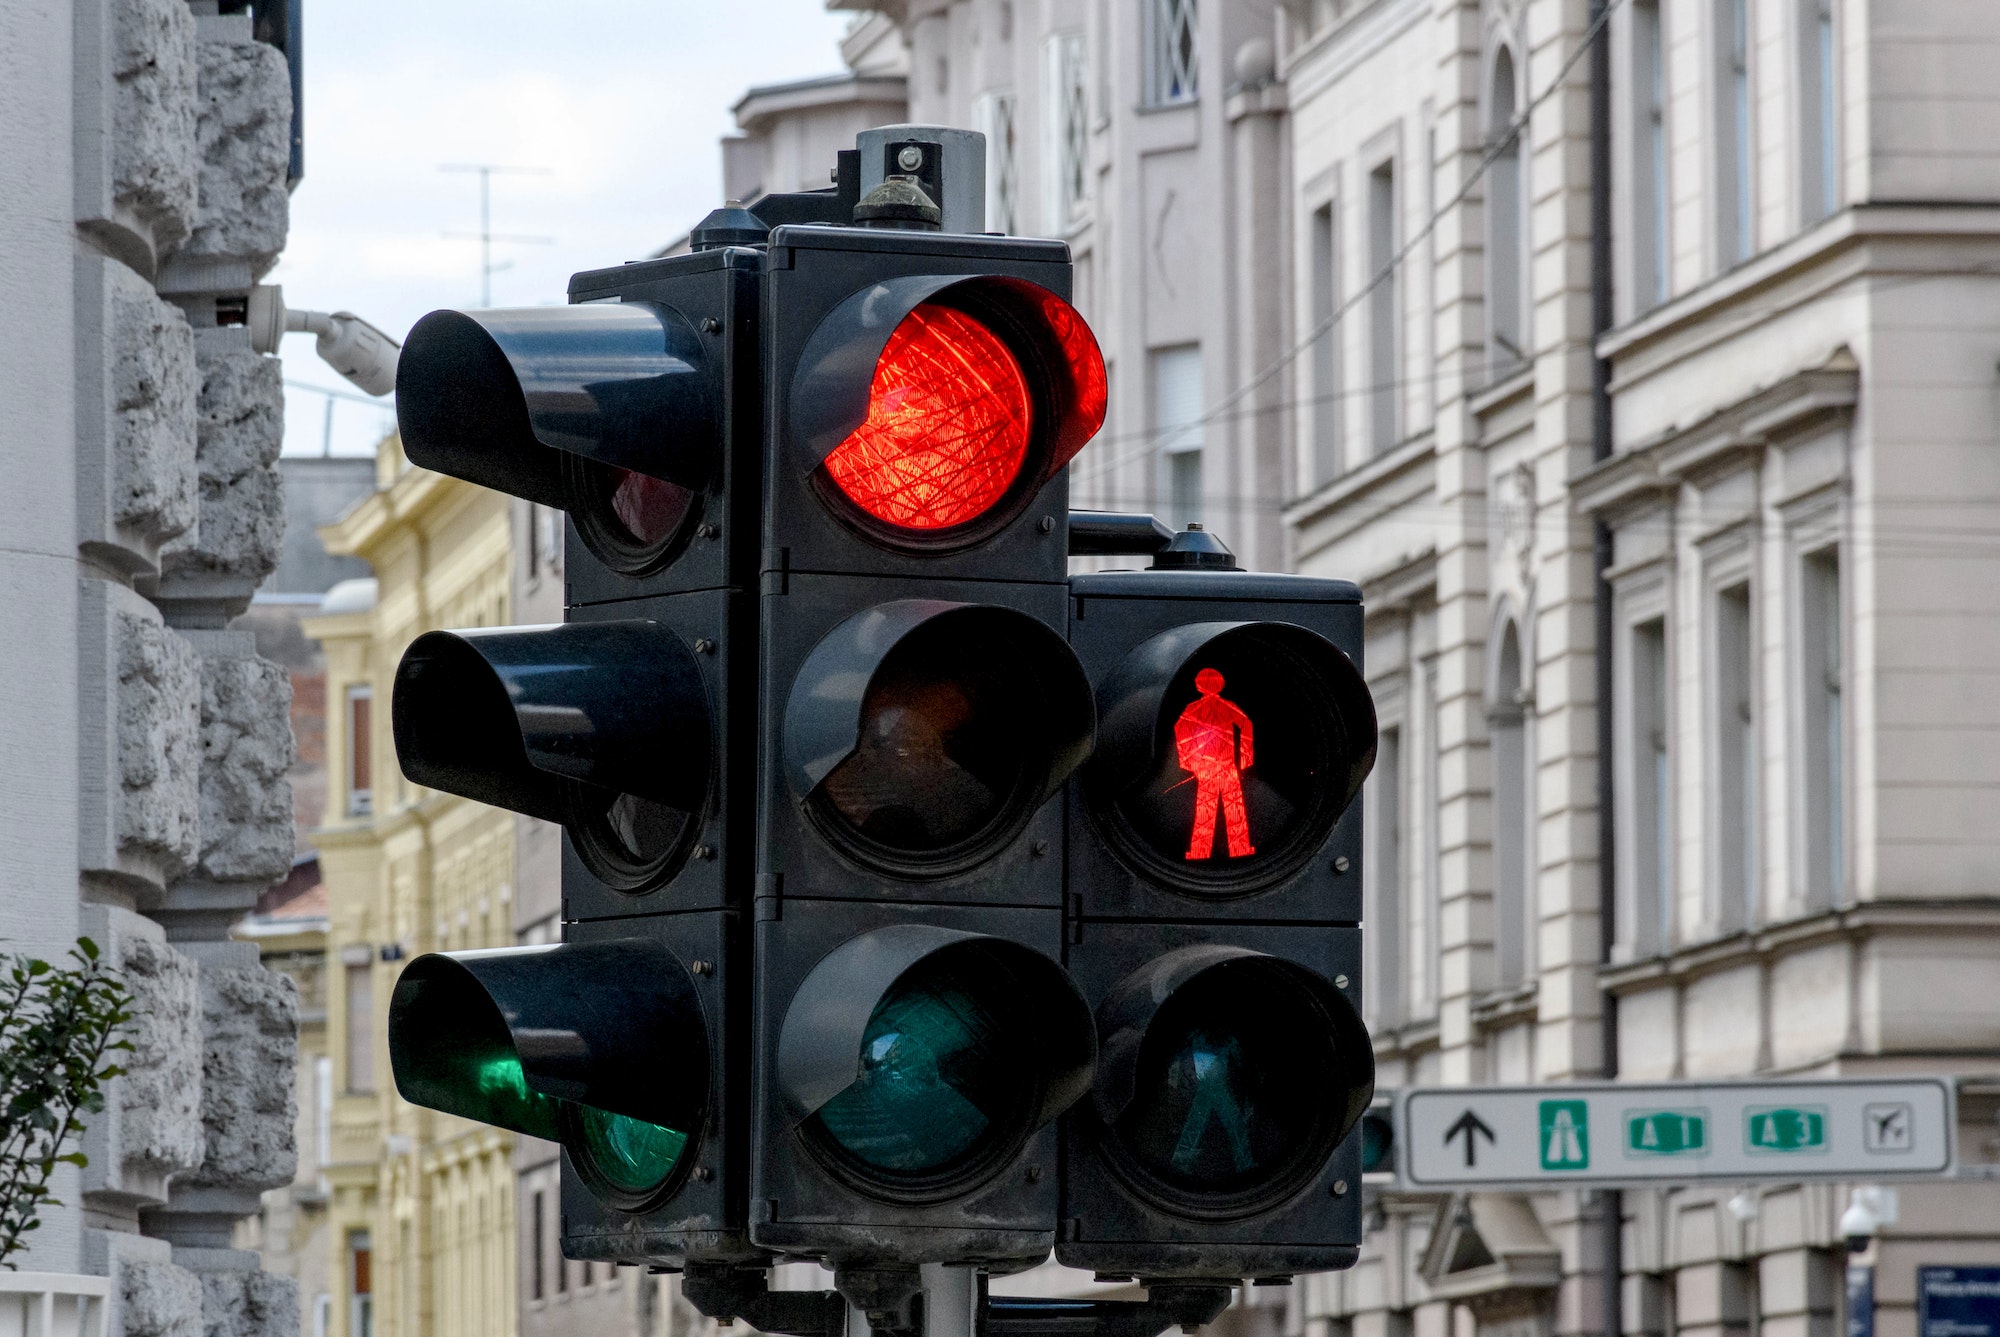 Close-up of traffic light in city. Red light at an intersection. J. U. Passion - Realtor, Writer, Preacher, Teacher